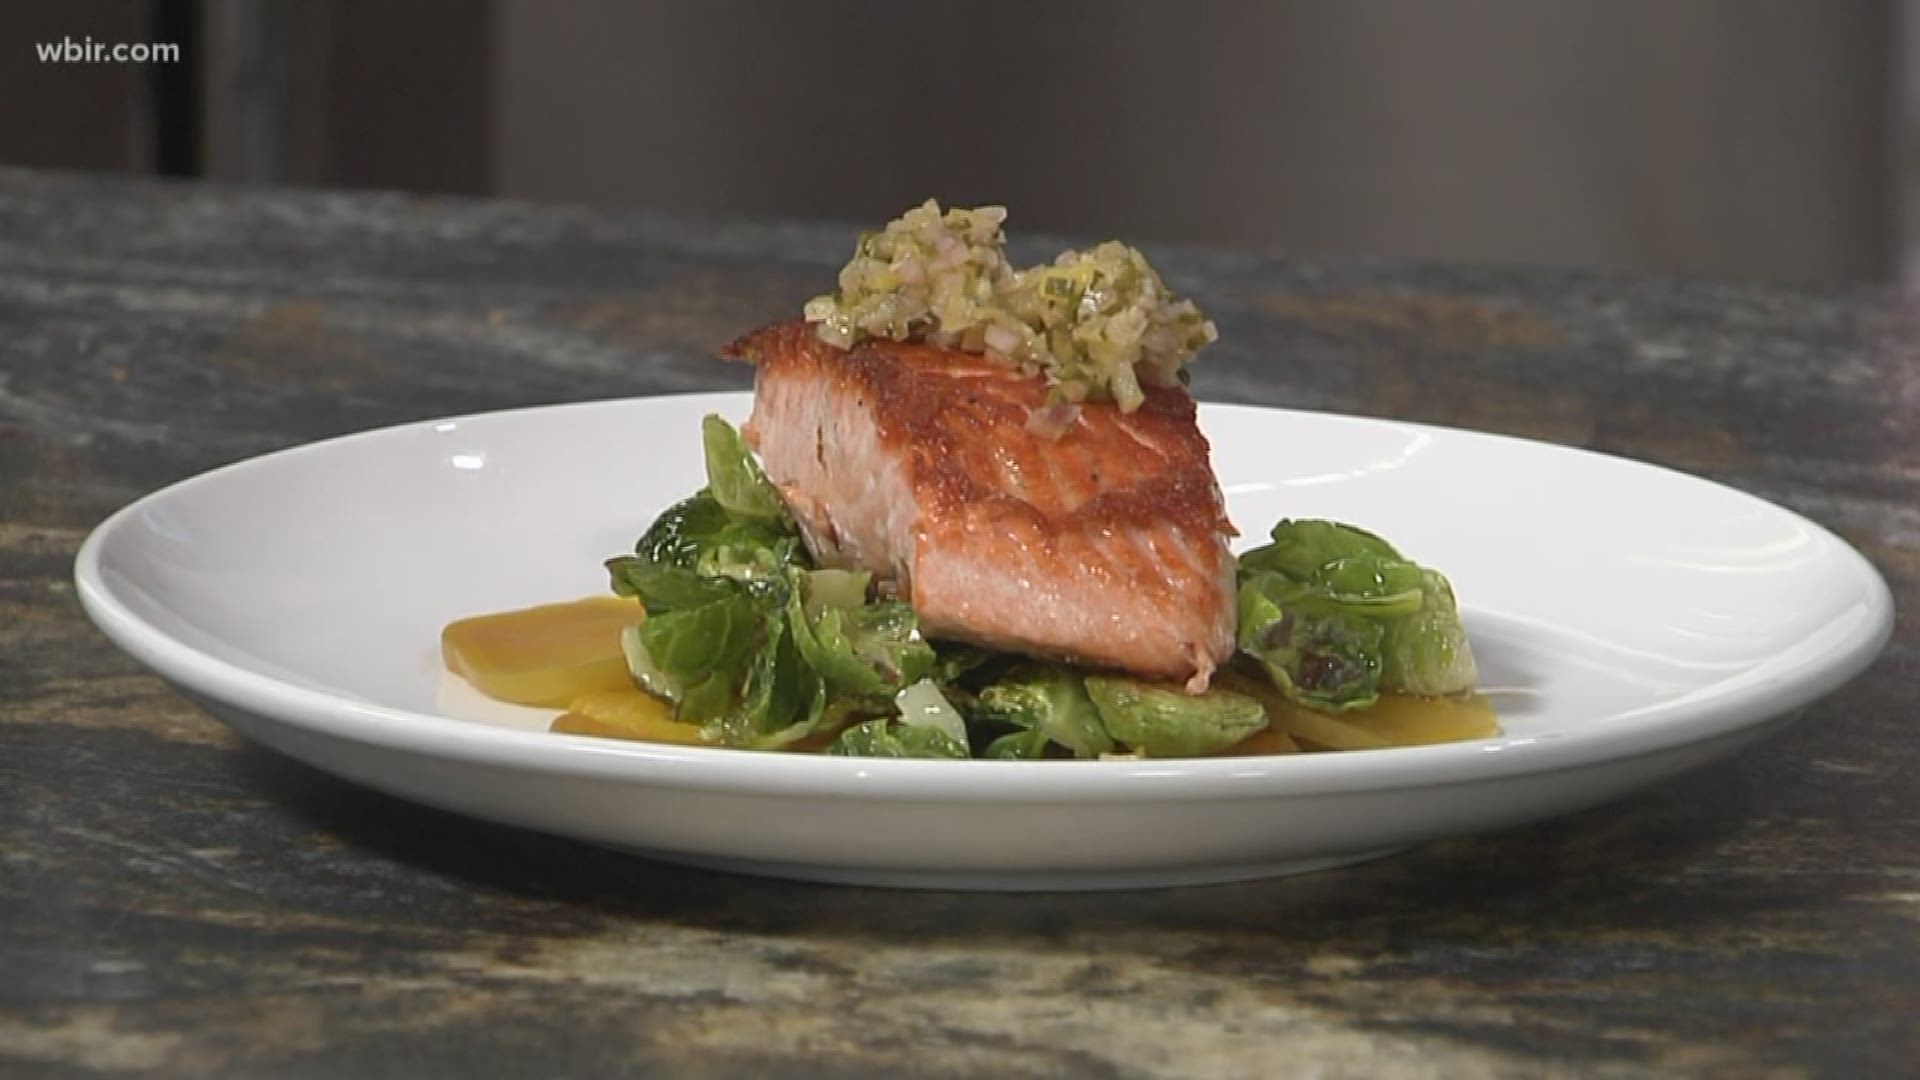 Harvest Executive Chef Geoff Kenney joins us in the kitchen to show us how to make a special grilled salmon dish.